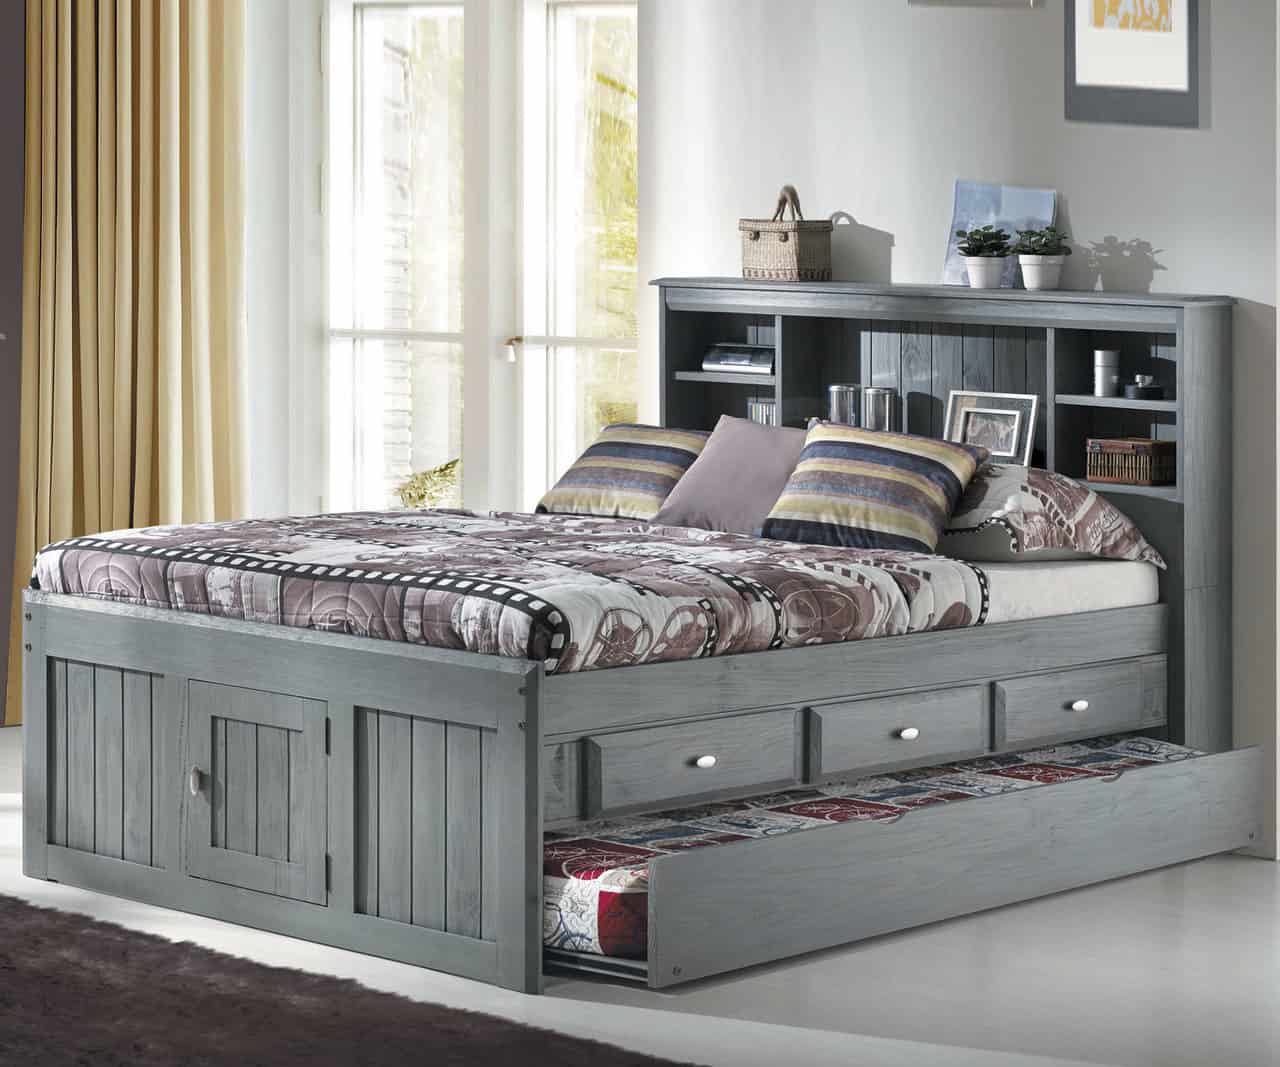 Create a storage bed using an old trundle bed frame